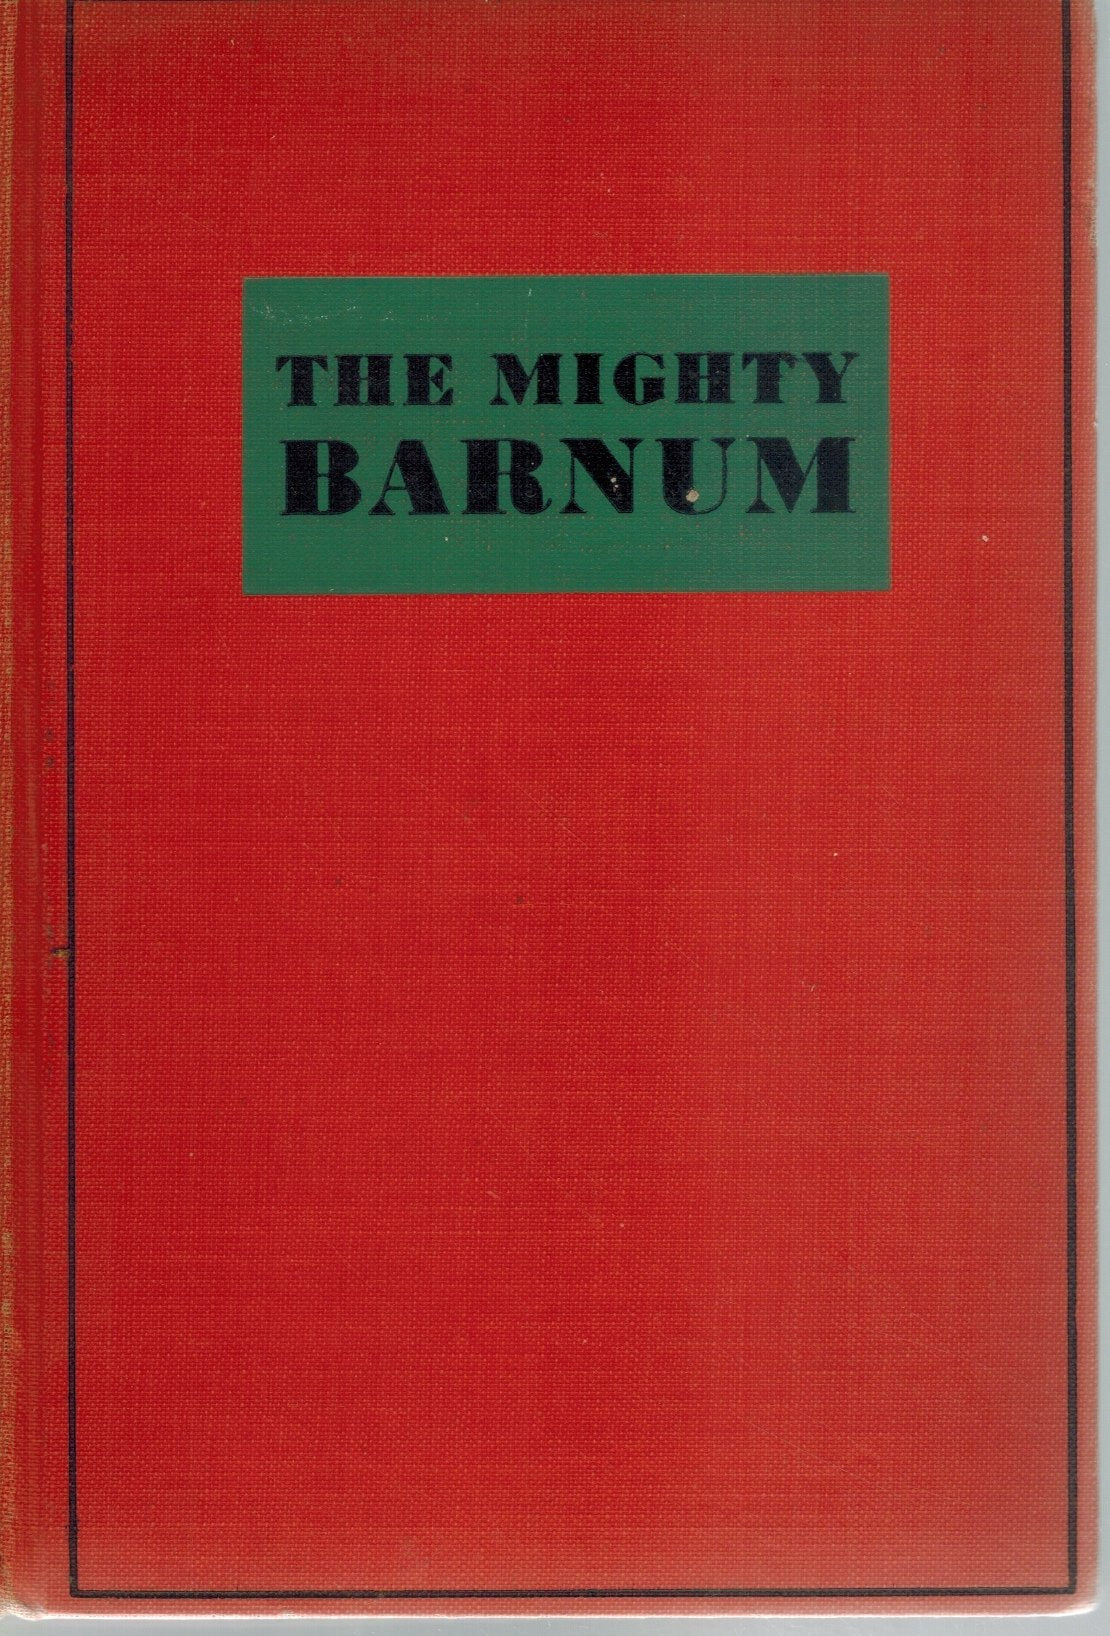 THE MIGHTY BARNUM, A SCREEN PLAY,  by Fowler, Gene and Bess Meredyth